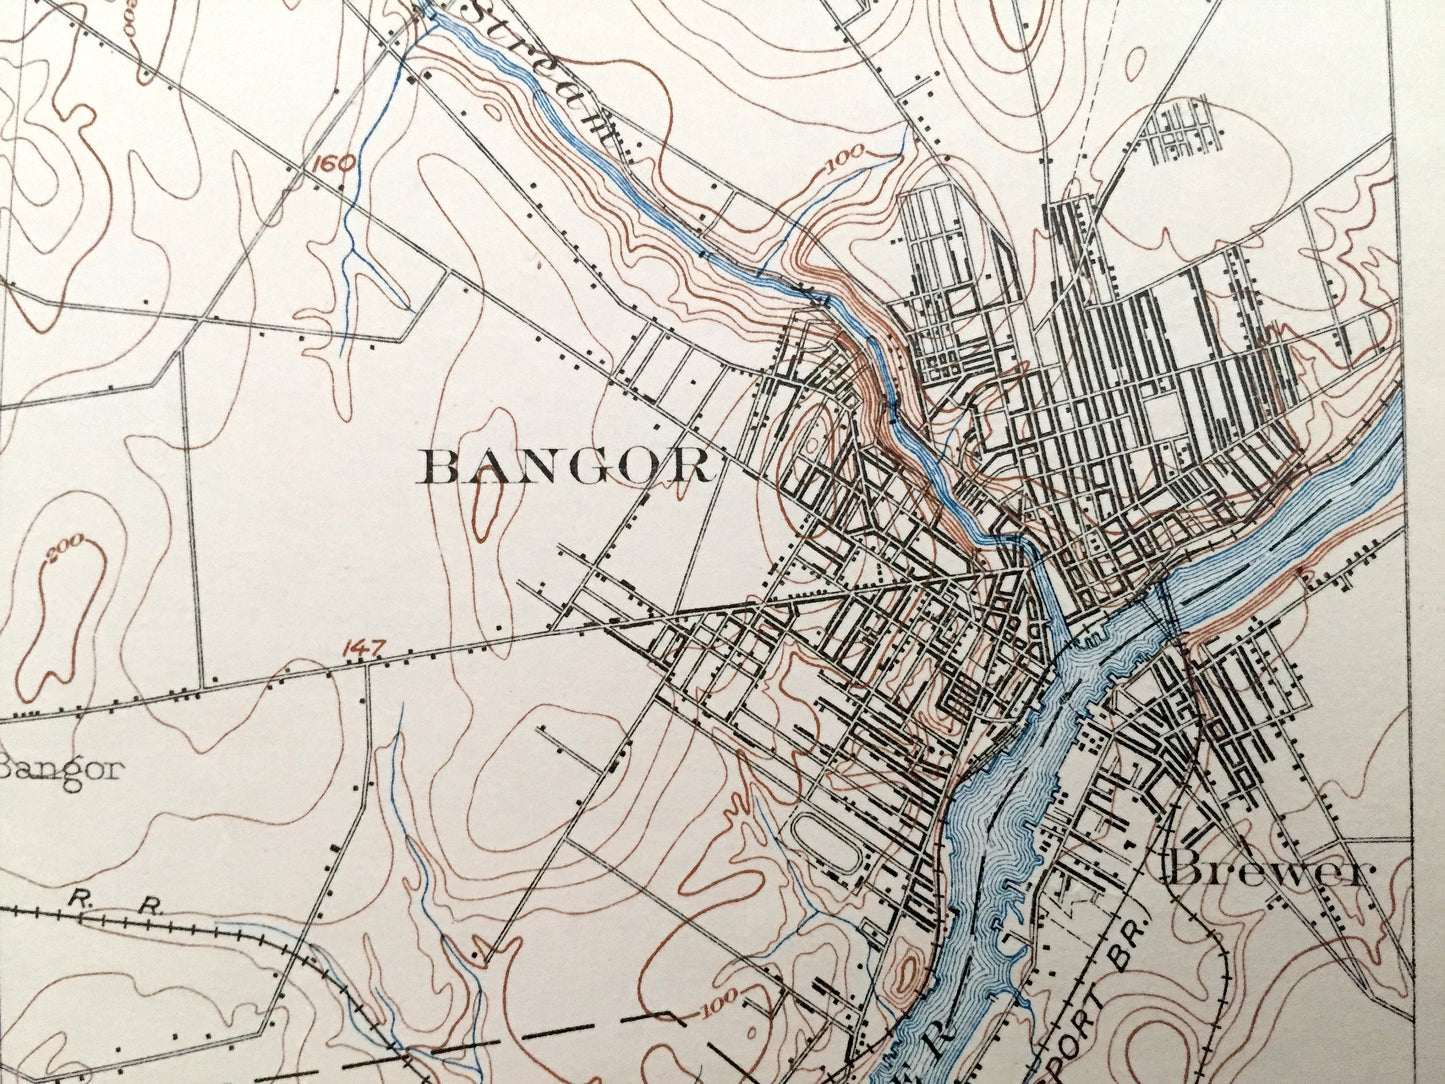 Antique Bangor, Maine 1902 US Geological Survey Topographic Map – Brewer, Hampden, Hermon, Orono, Pushaw Lake, Old Town, Penobscot County ME